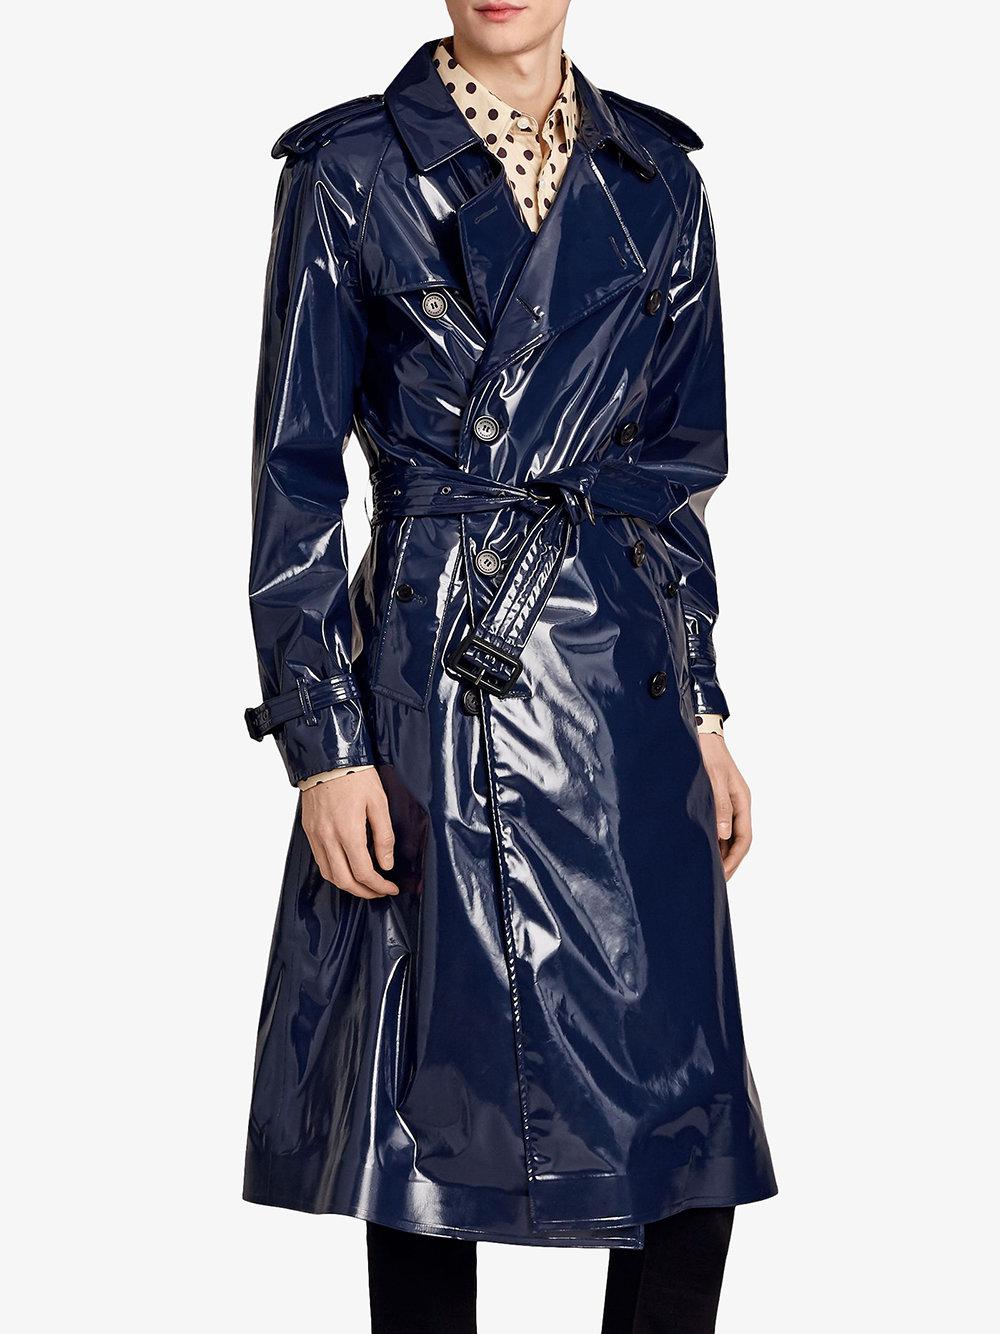 Lyst - Burberry Laminated Trench Coat in Blue